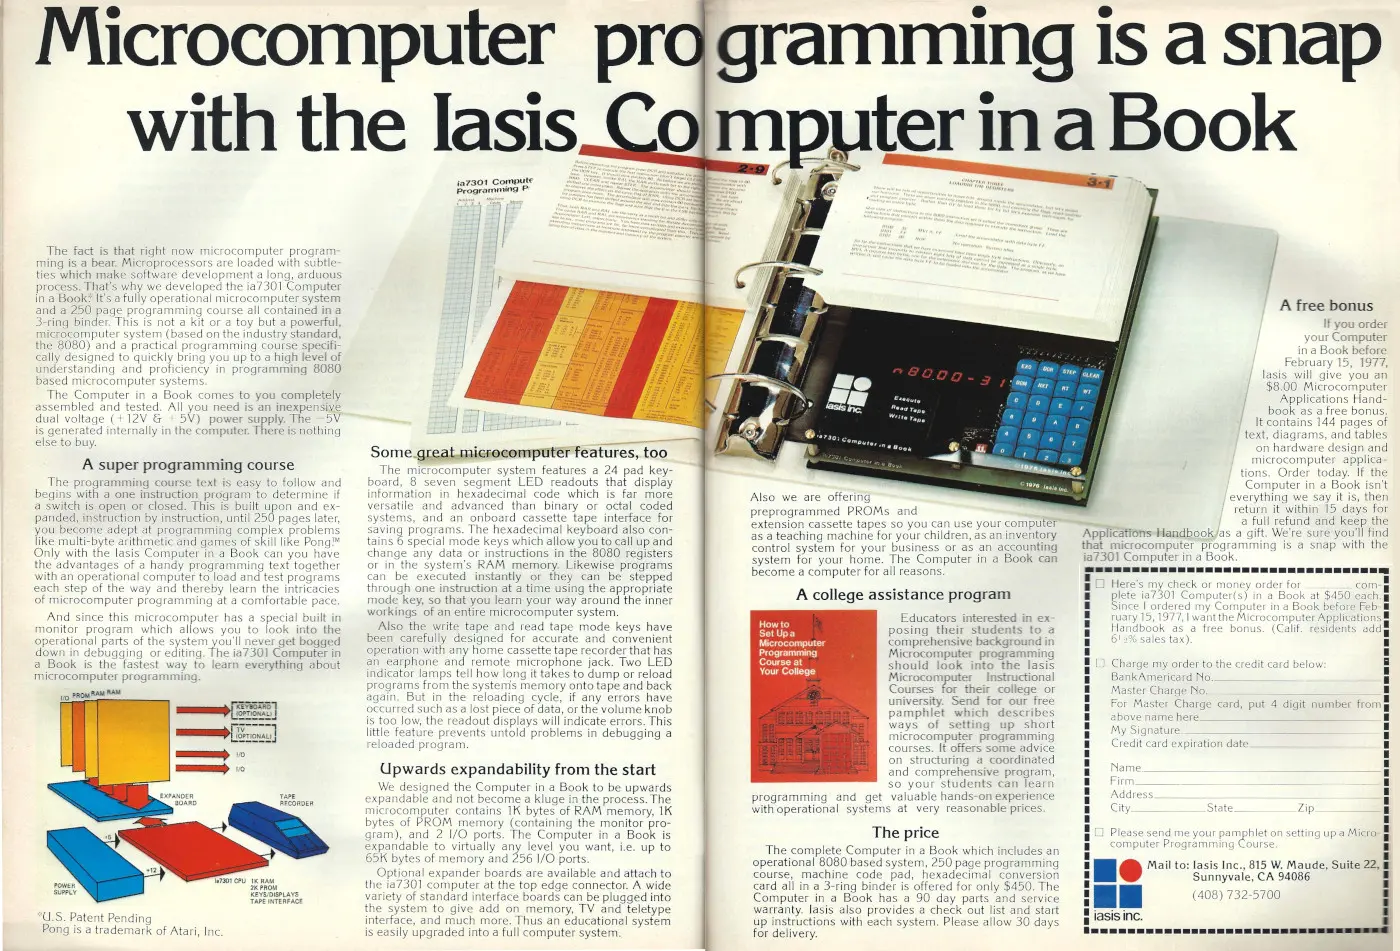 Iasis Advert: Microcomputer programming is a snap with the Iasis Computer in a Book, from Byte - The Small Systems Journal, January 1977